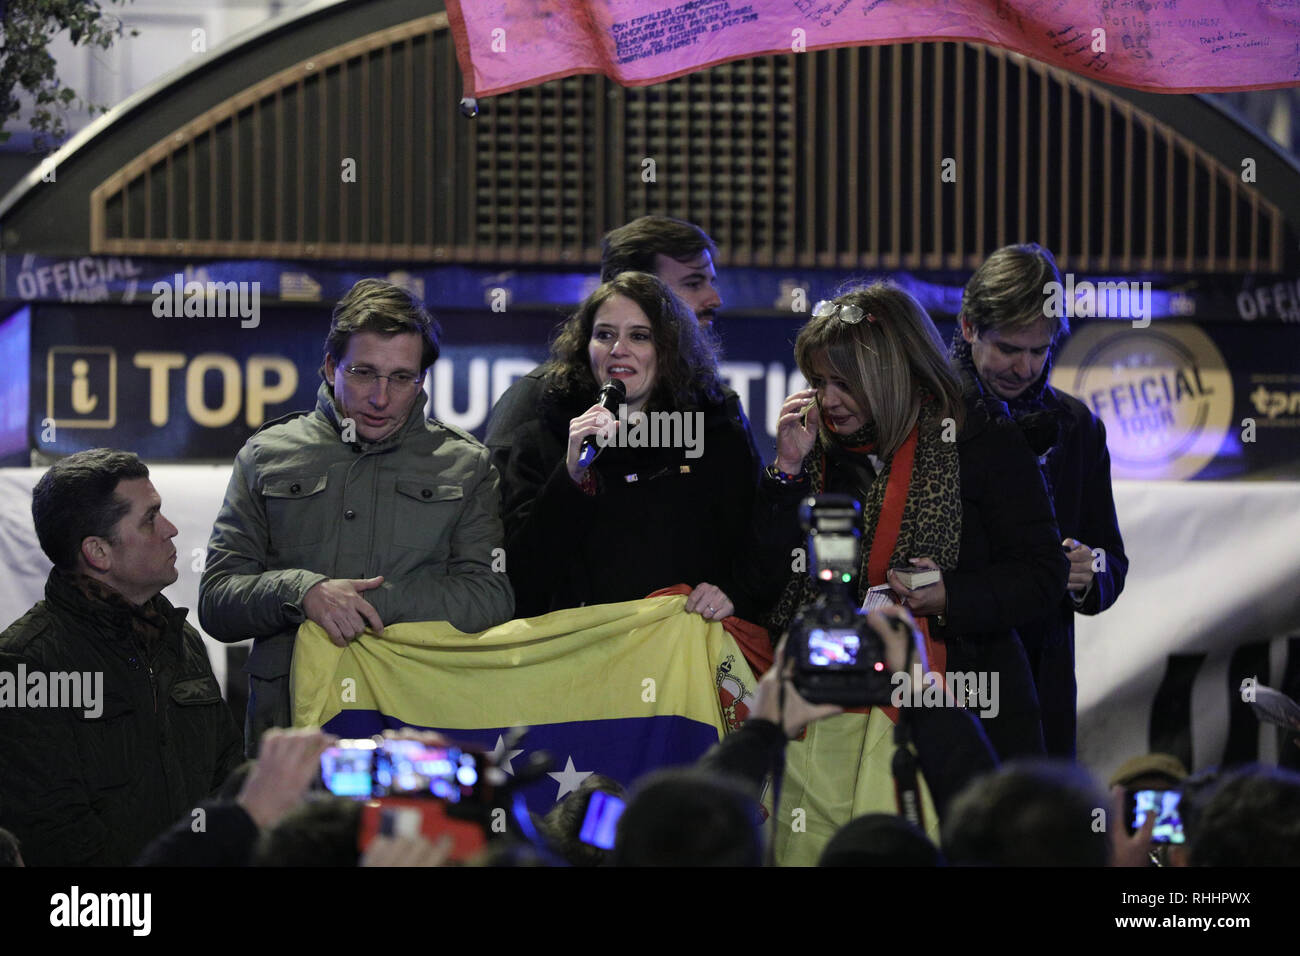 Madrid, Spain. 2nd Feb, 2019. Jose Luis Martines Almeida(L), candidate for the Mayor of Madrid for the Popular Party (PP) and Isabel Diaz Ayuso(C), candidate for the Presidency of the Community of Madrid for the Popular Party (PP) are seen attending the protest at the Puerta del Sol in support of Juan GuaidÃ³ to express the recognition as interim president of Venezuela. Credit: Jesus Hellin/SOPA Images/ZUMA Wire/Alamy Live News Stock Photo